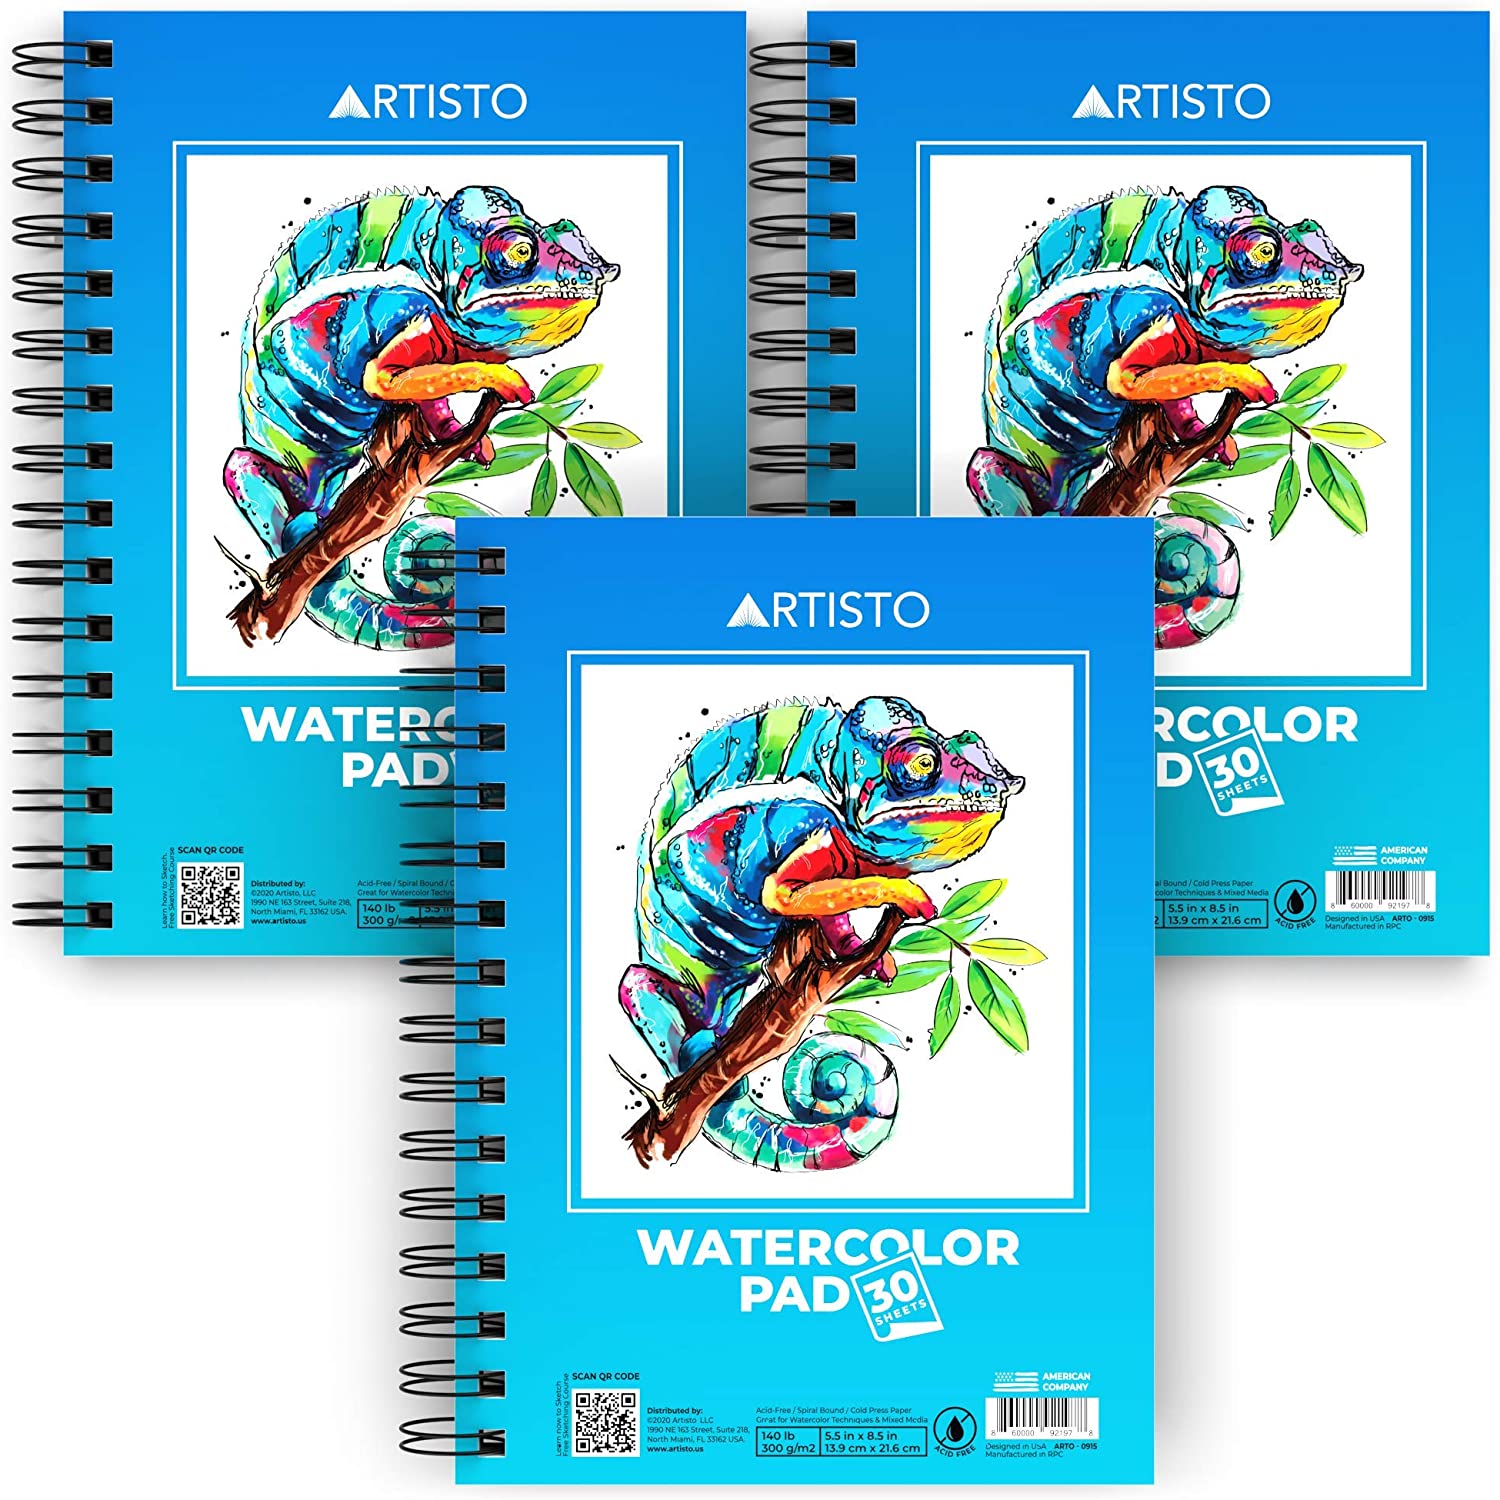 Intuitive Watercolour Floral and Review & Demo of ARTISTO Watercolor Pad 